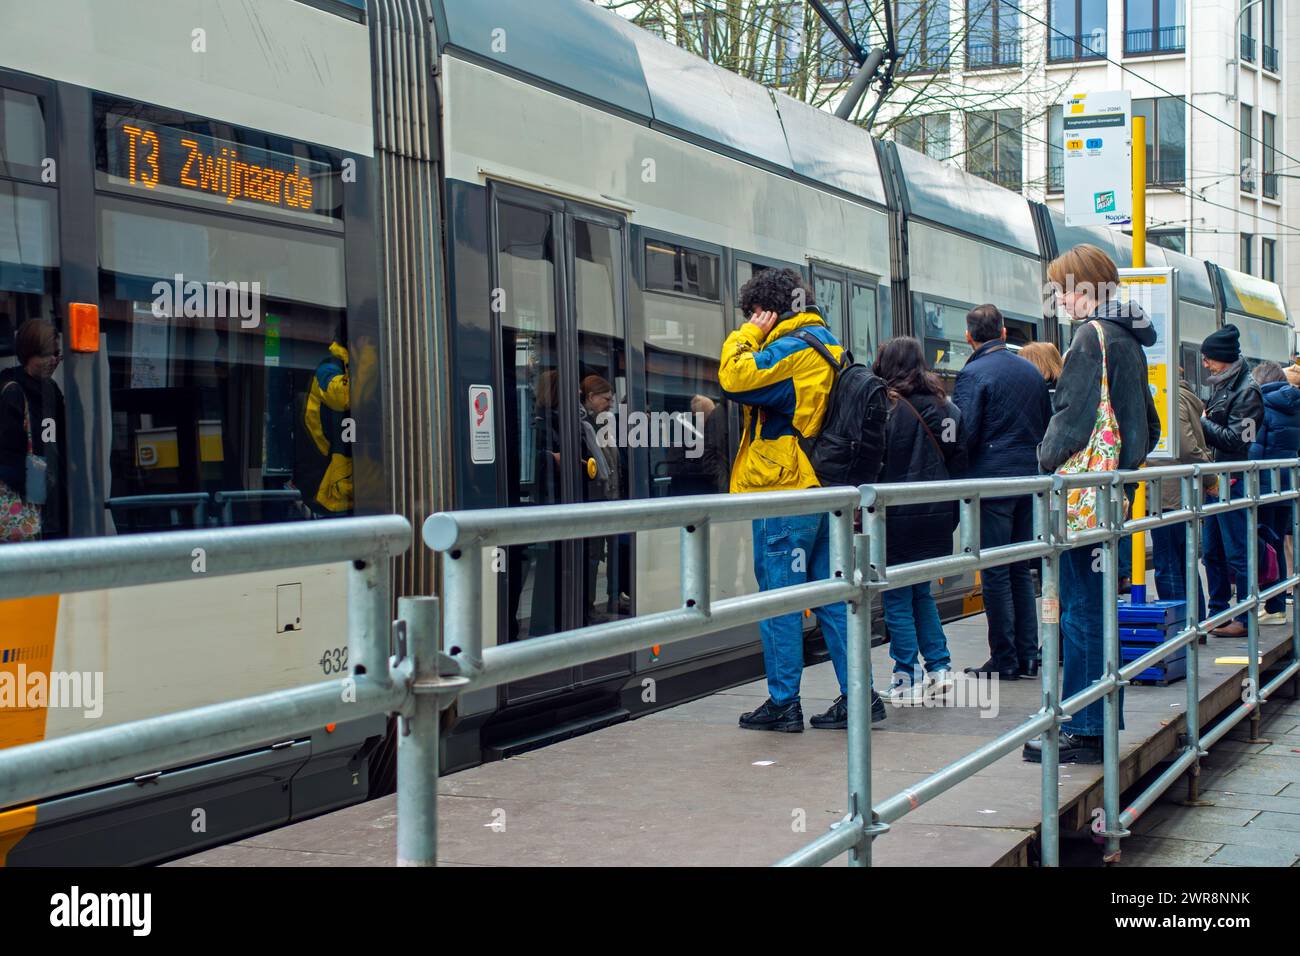 Commuters and shoppers boarding tram at tramstop of the Flemish transport company De Lijn in the city centre of Ghent, East Flanders, Belgium Stock Photo